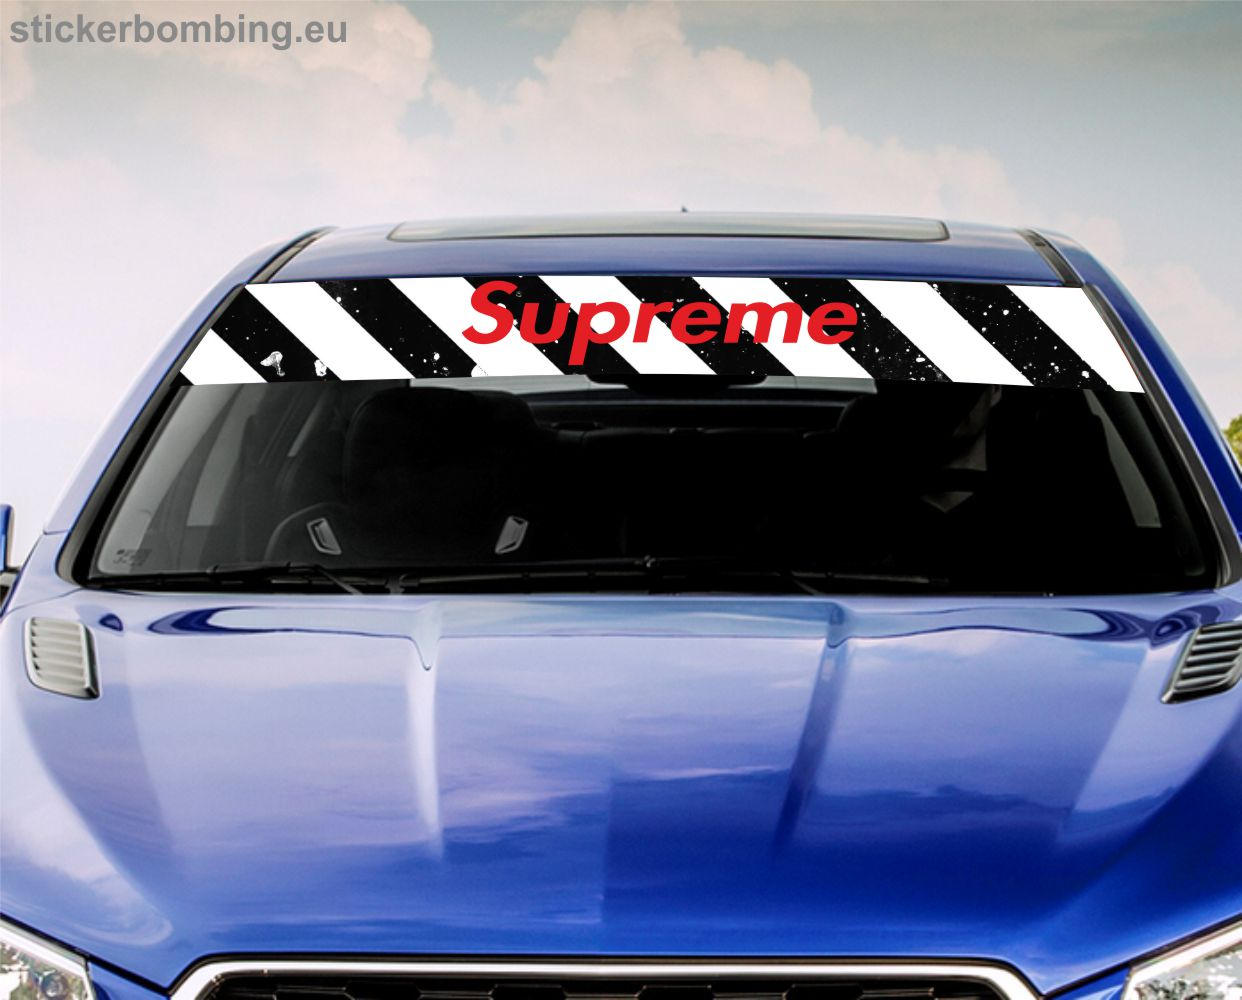 Car front windshield sticker tide brand Supreme front and rear gear  universal car sticker personality trend